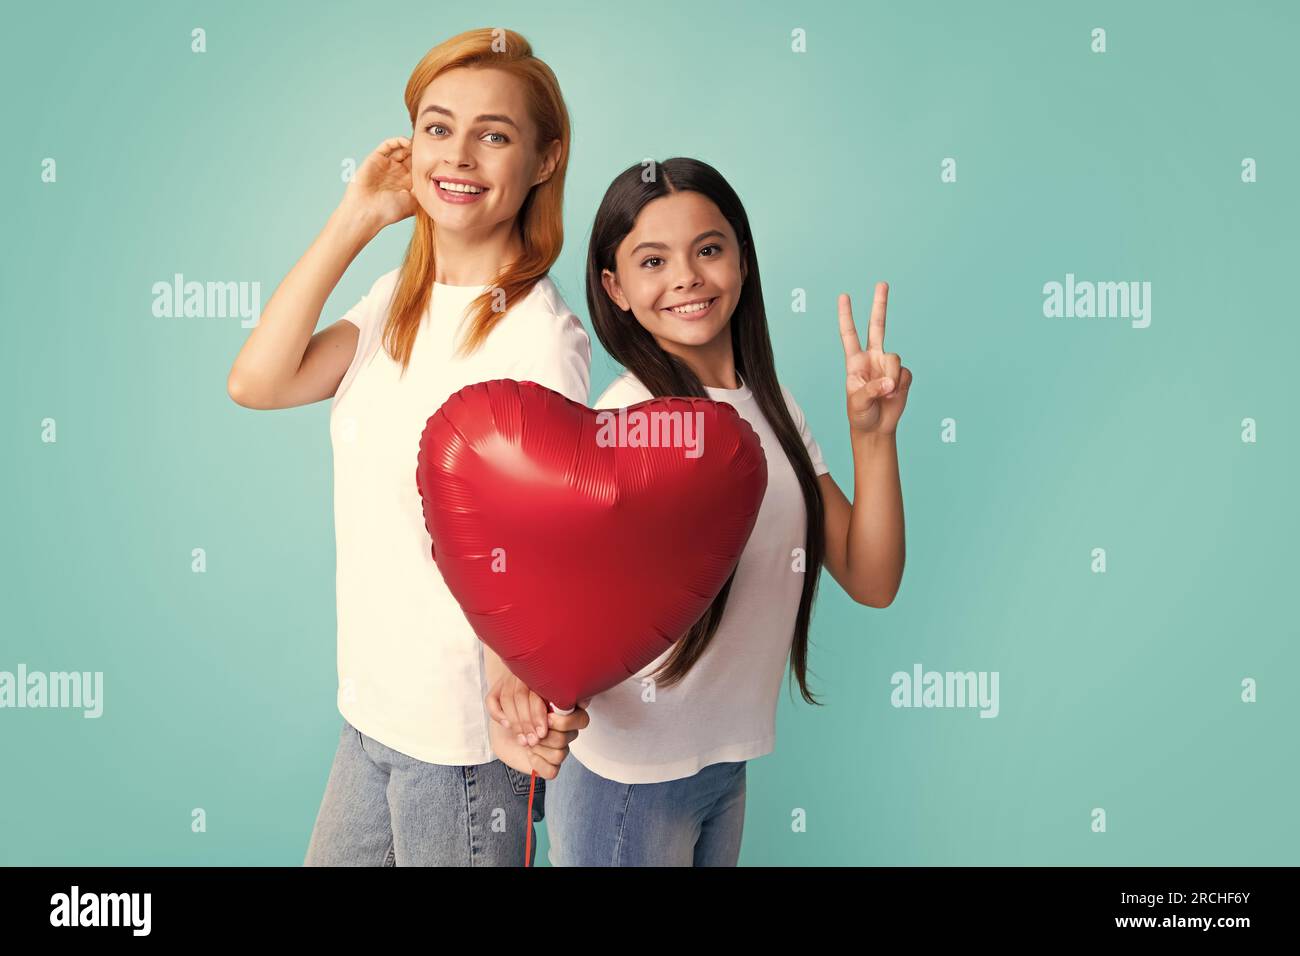 Valentines day. Smiling mother and daughter holding love heart balloon on blue background. Happy Valentines day to my mom. Stock Photo